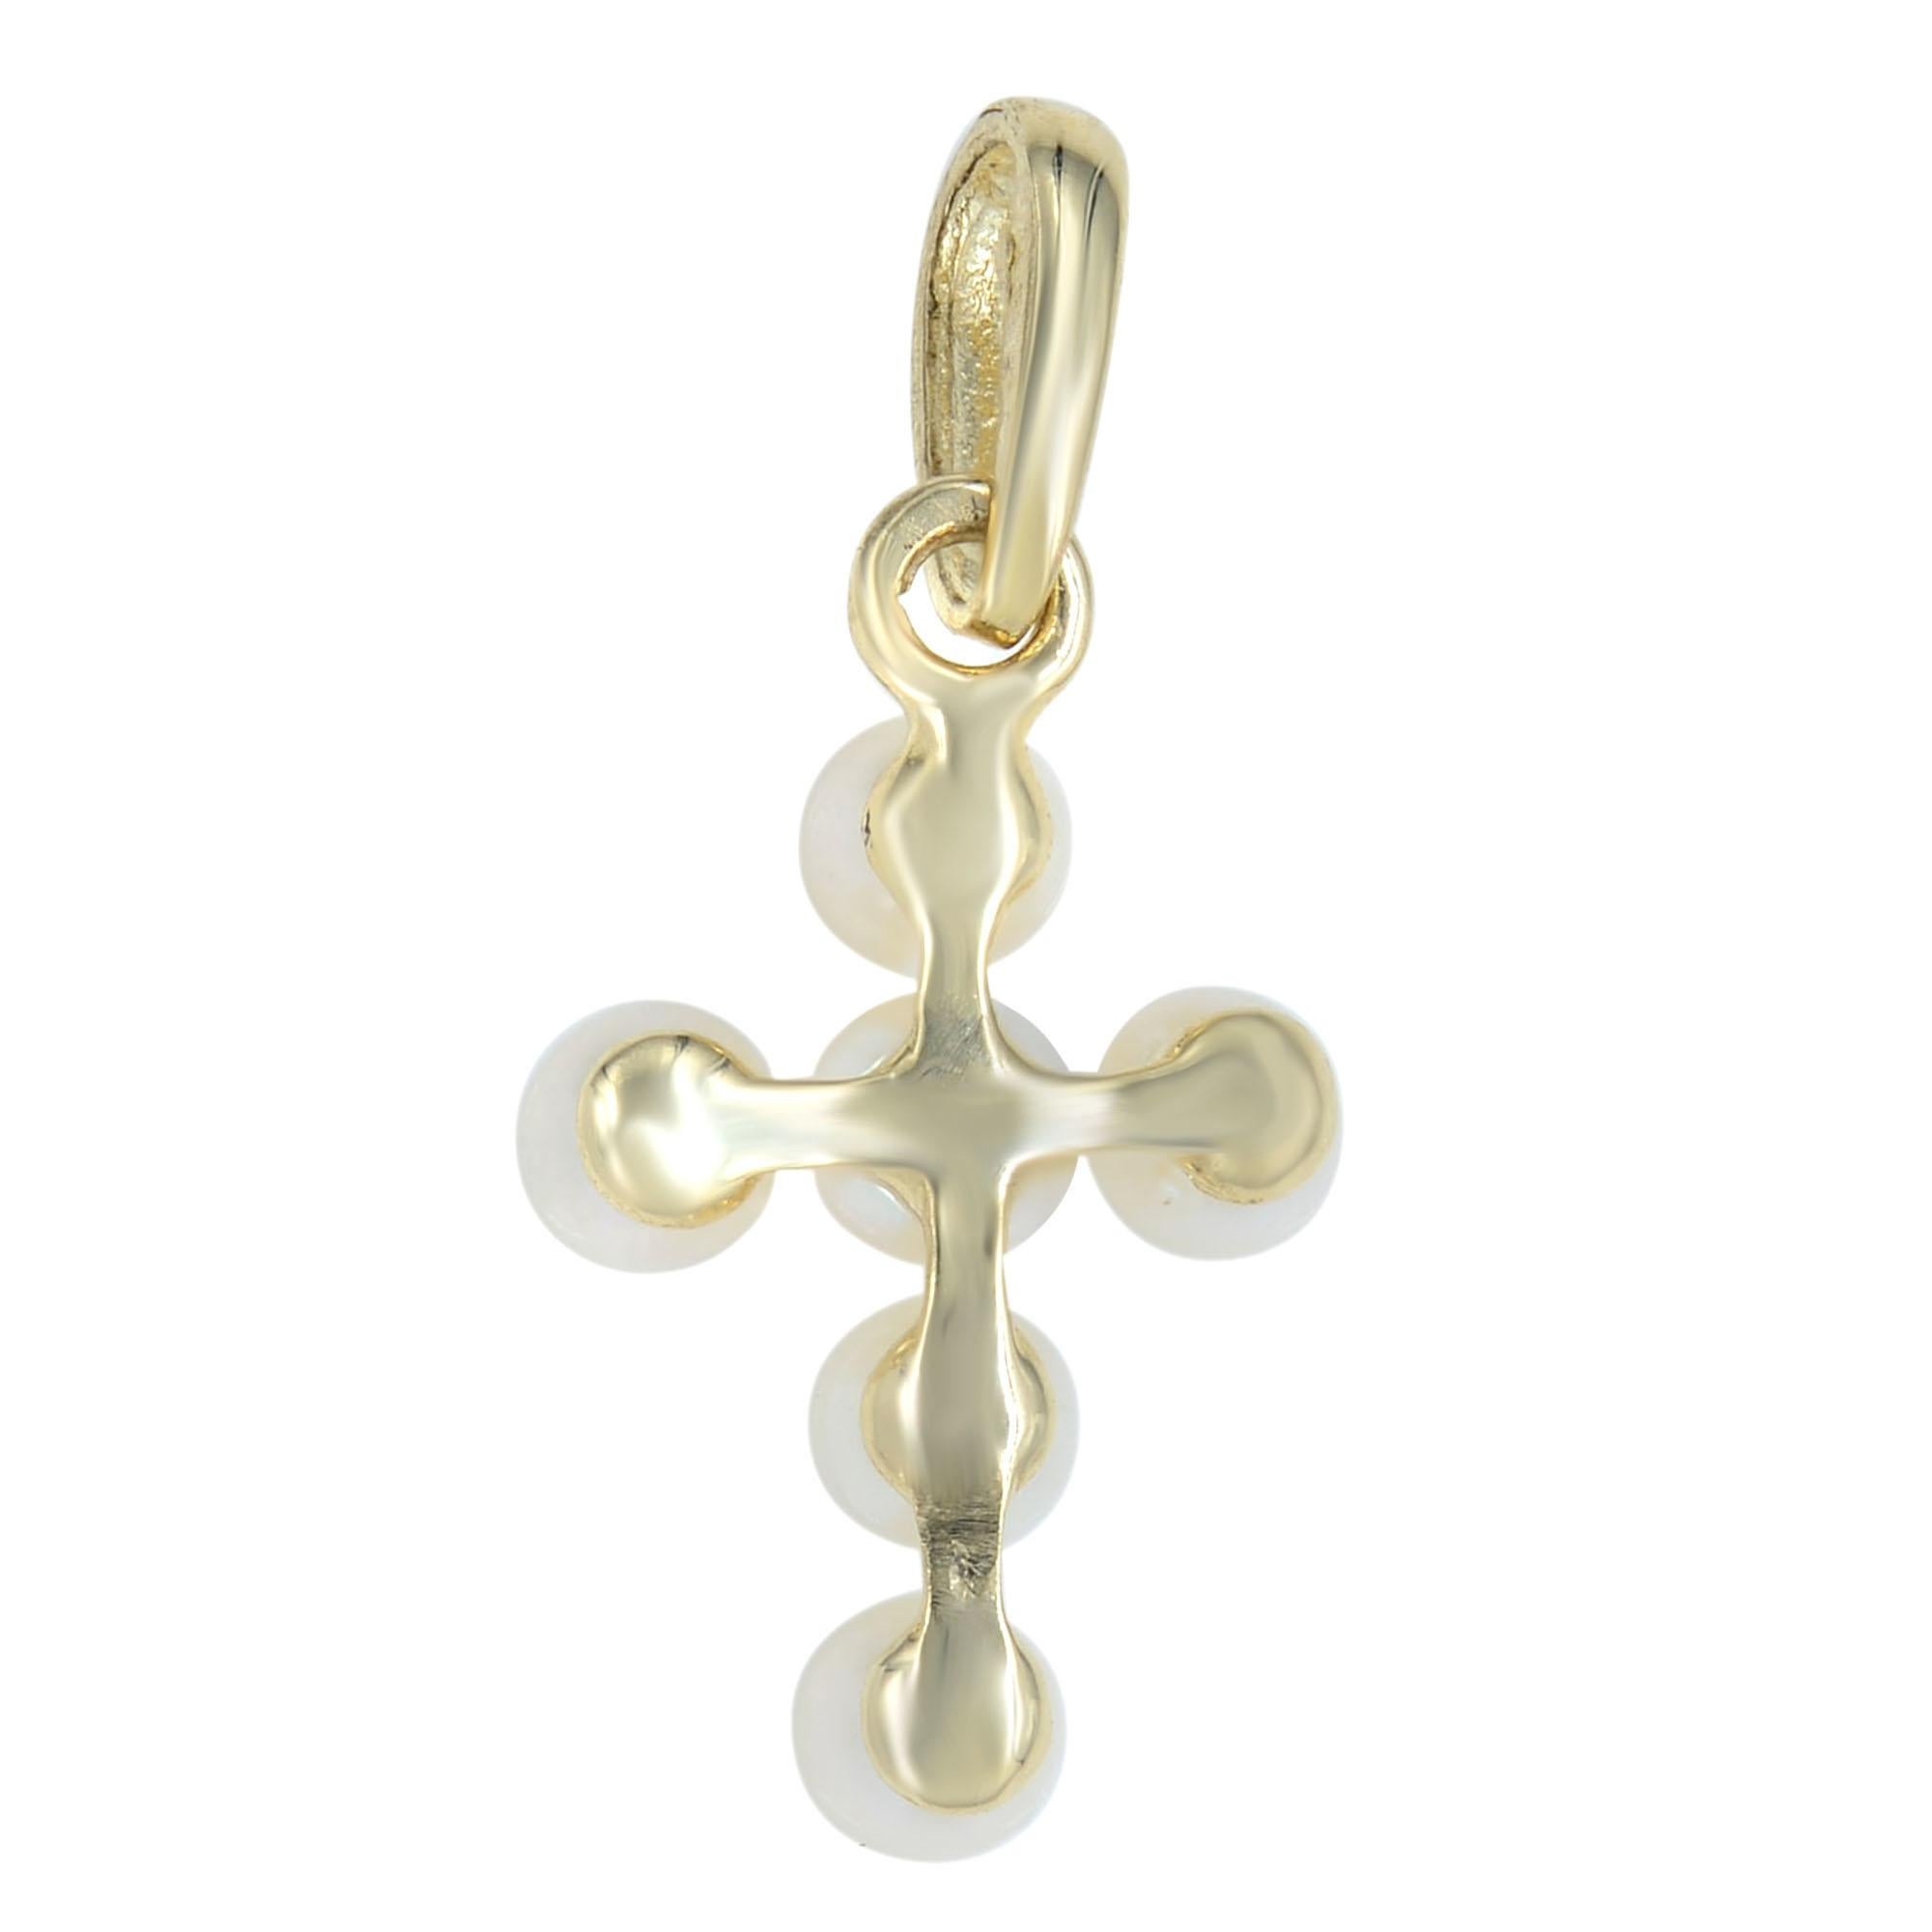 Cute and delicate, this petite pearl cross pendant gives a charming everyday look. Crafted in 14K yellow gold, this symbol of faith features six luminous cultured freshwater pearls in a cross-shaped design. Measurement: 12mm long. Total weight: 0.31